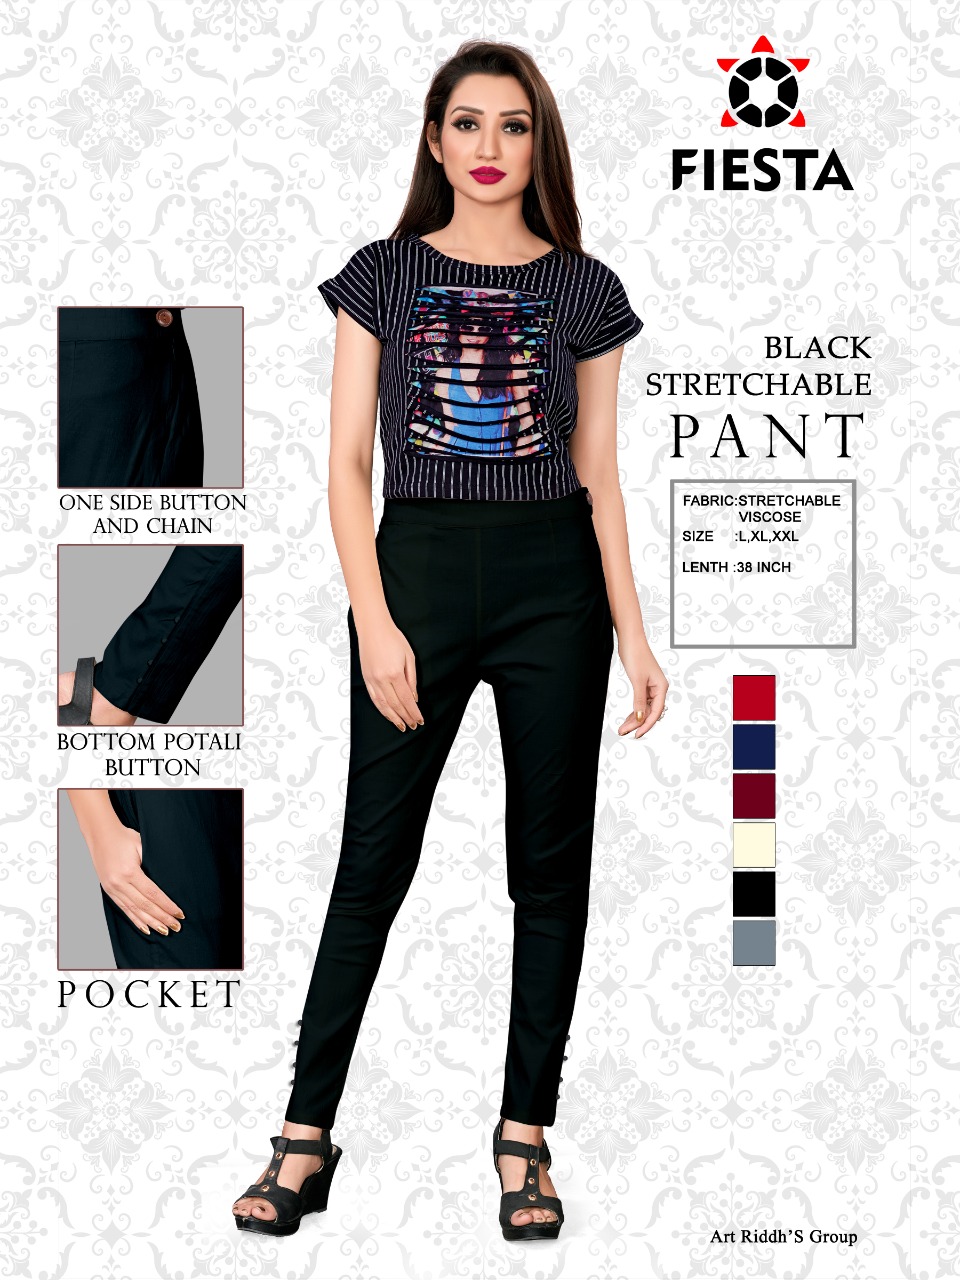 Fiesta Stretchable Viscose Pants Wholesale Online Best Rates Collection